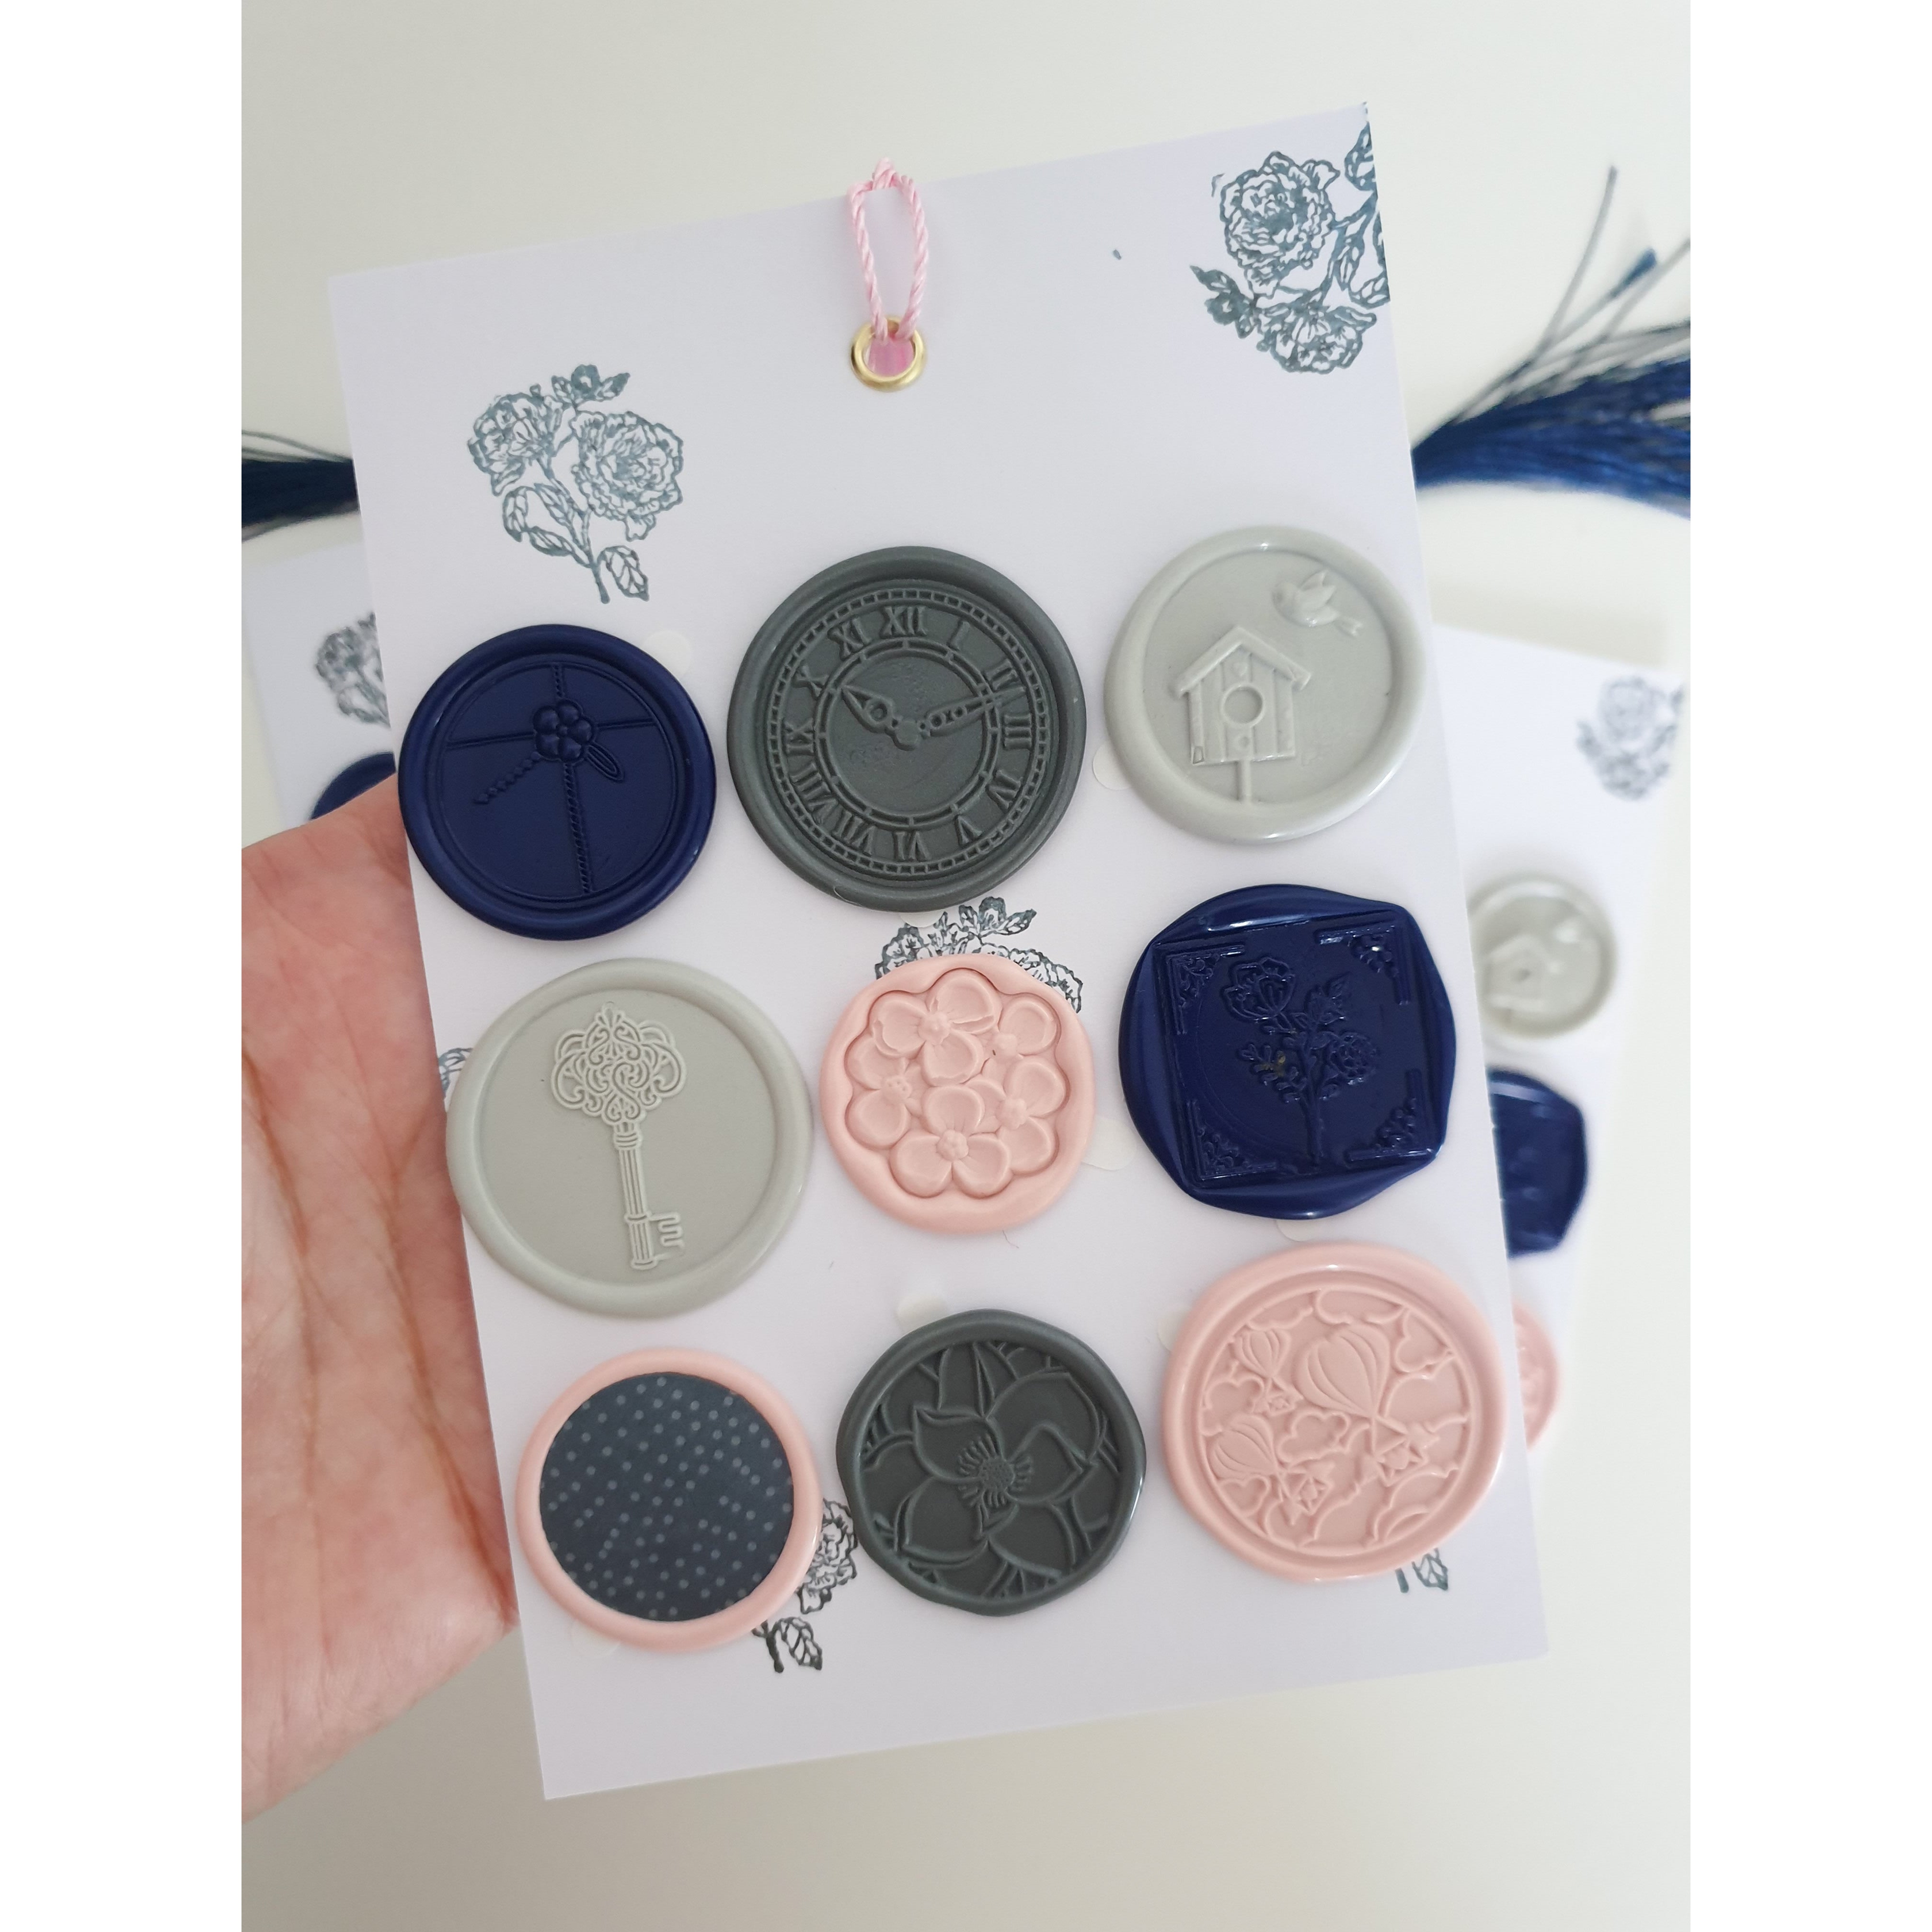 Luxury Wax Seal Set – Little Added Touches